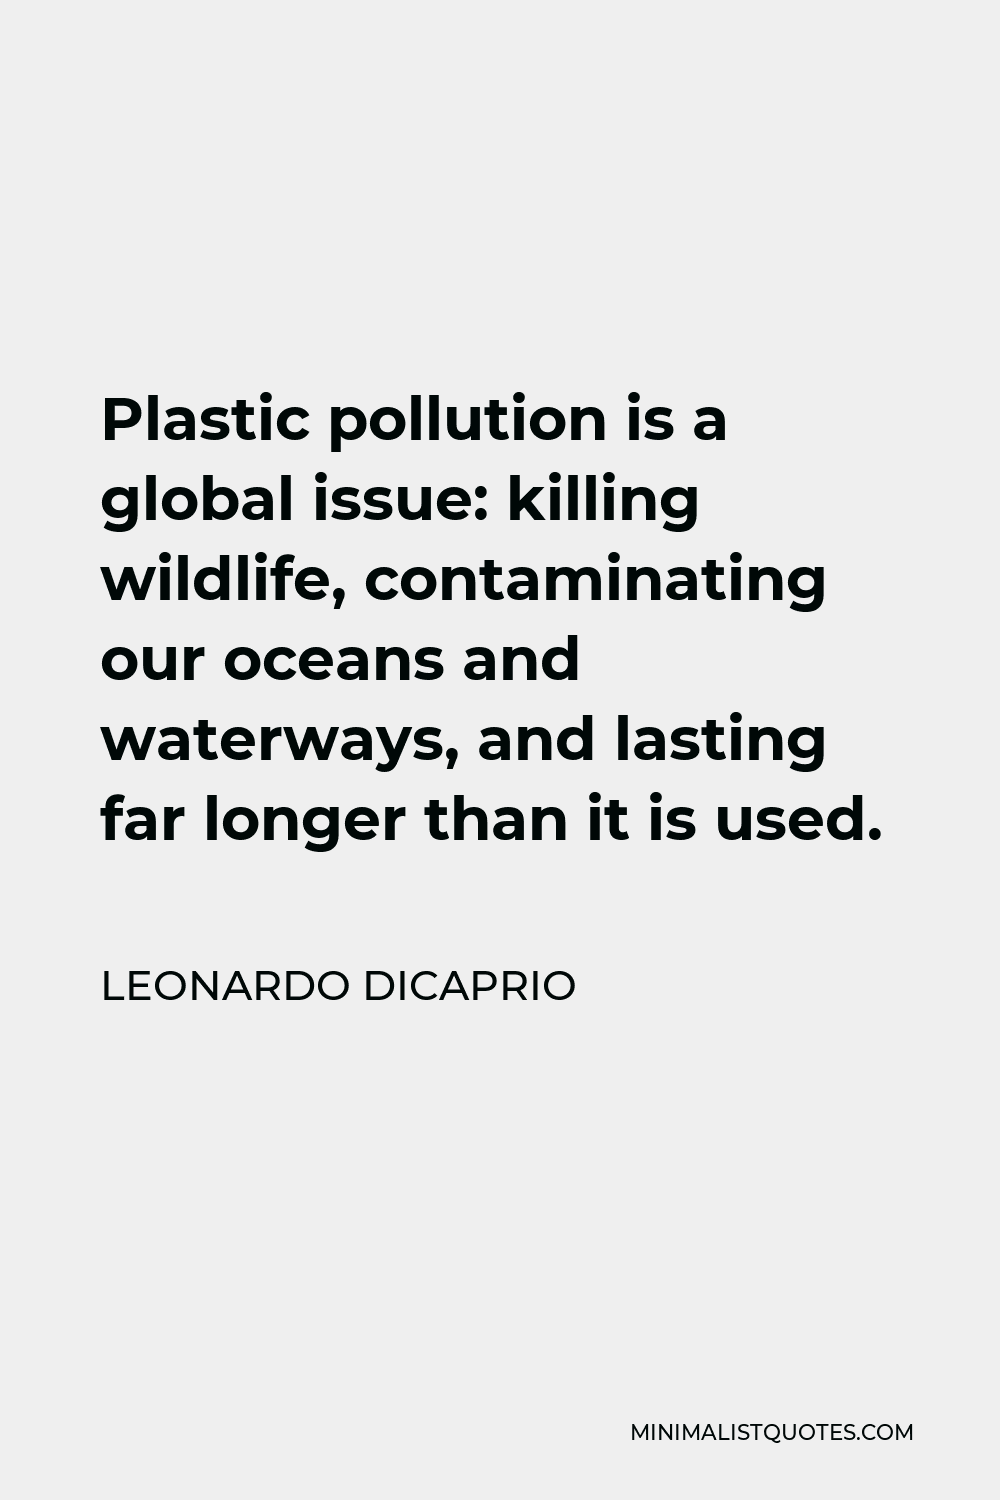 Leonardo DiCaprio Quote - Plastic pollution is a global issue: killing wildlife, contaminating our oceans and waterways, and lasting far longer than it is used.